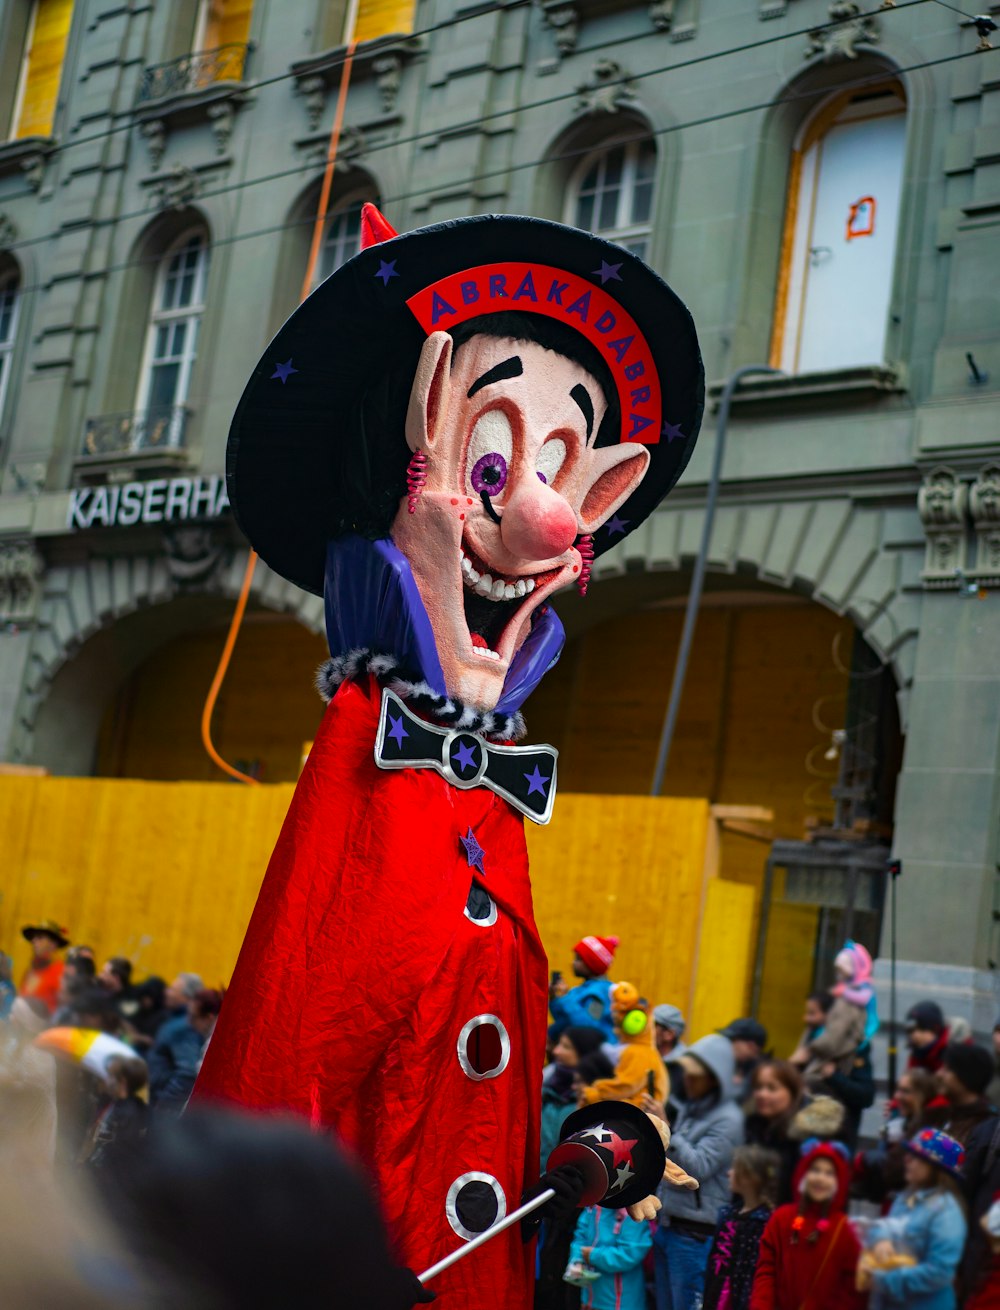 a man dressed in a red costume and a black hat